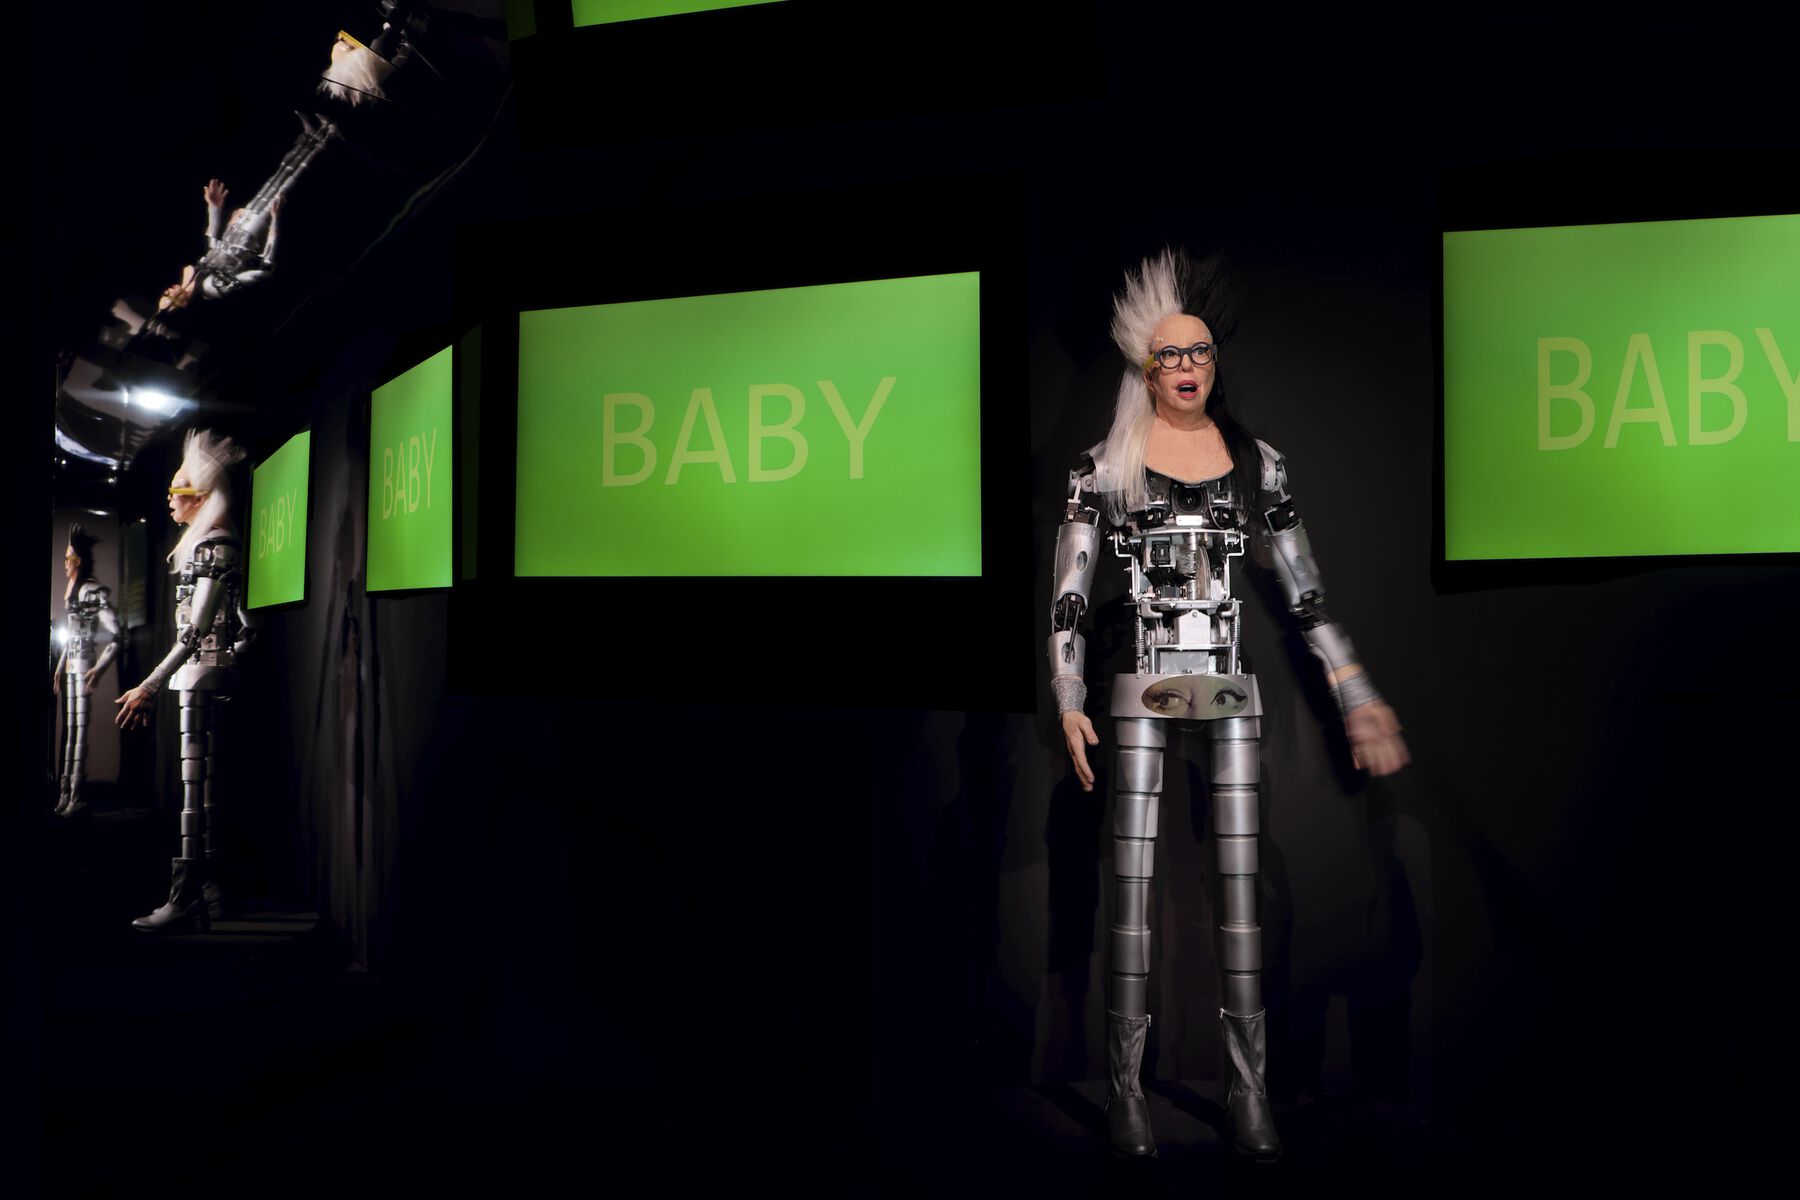 A robot with a mechanical body with the head of the artist ORLAN standing in a dark mirrored room with two T.V. screens behind it displaying green with yellow text that reads “Baby”